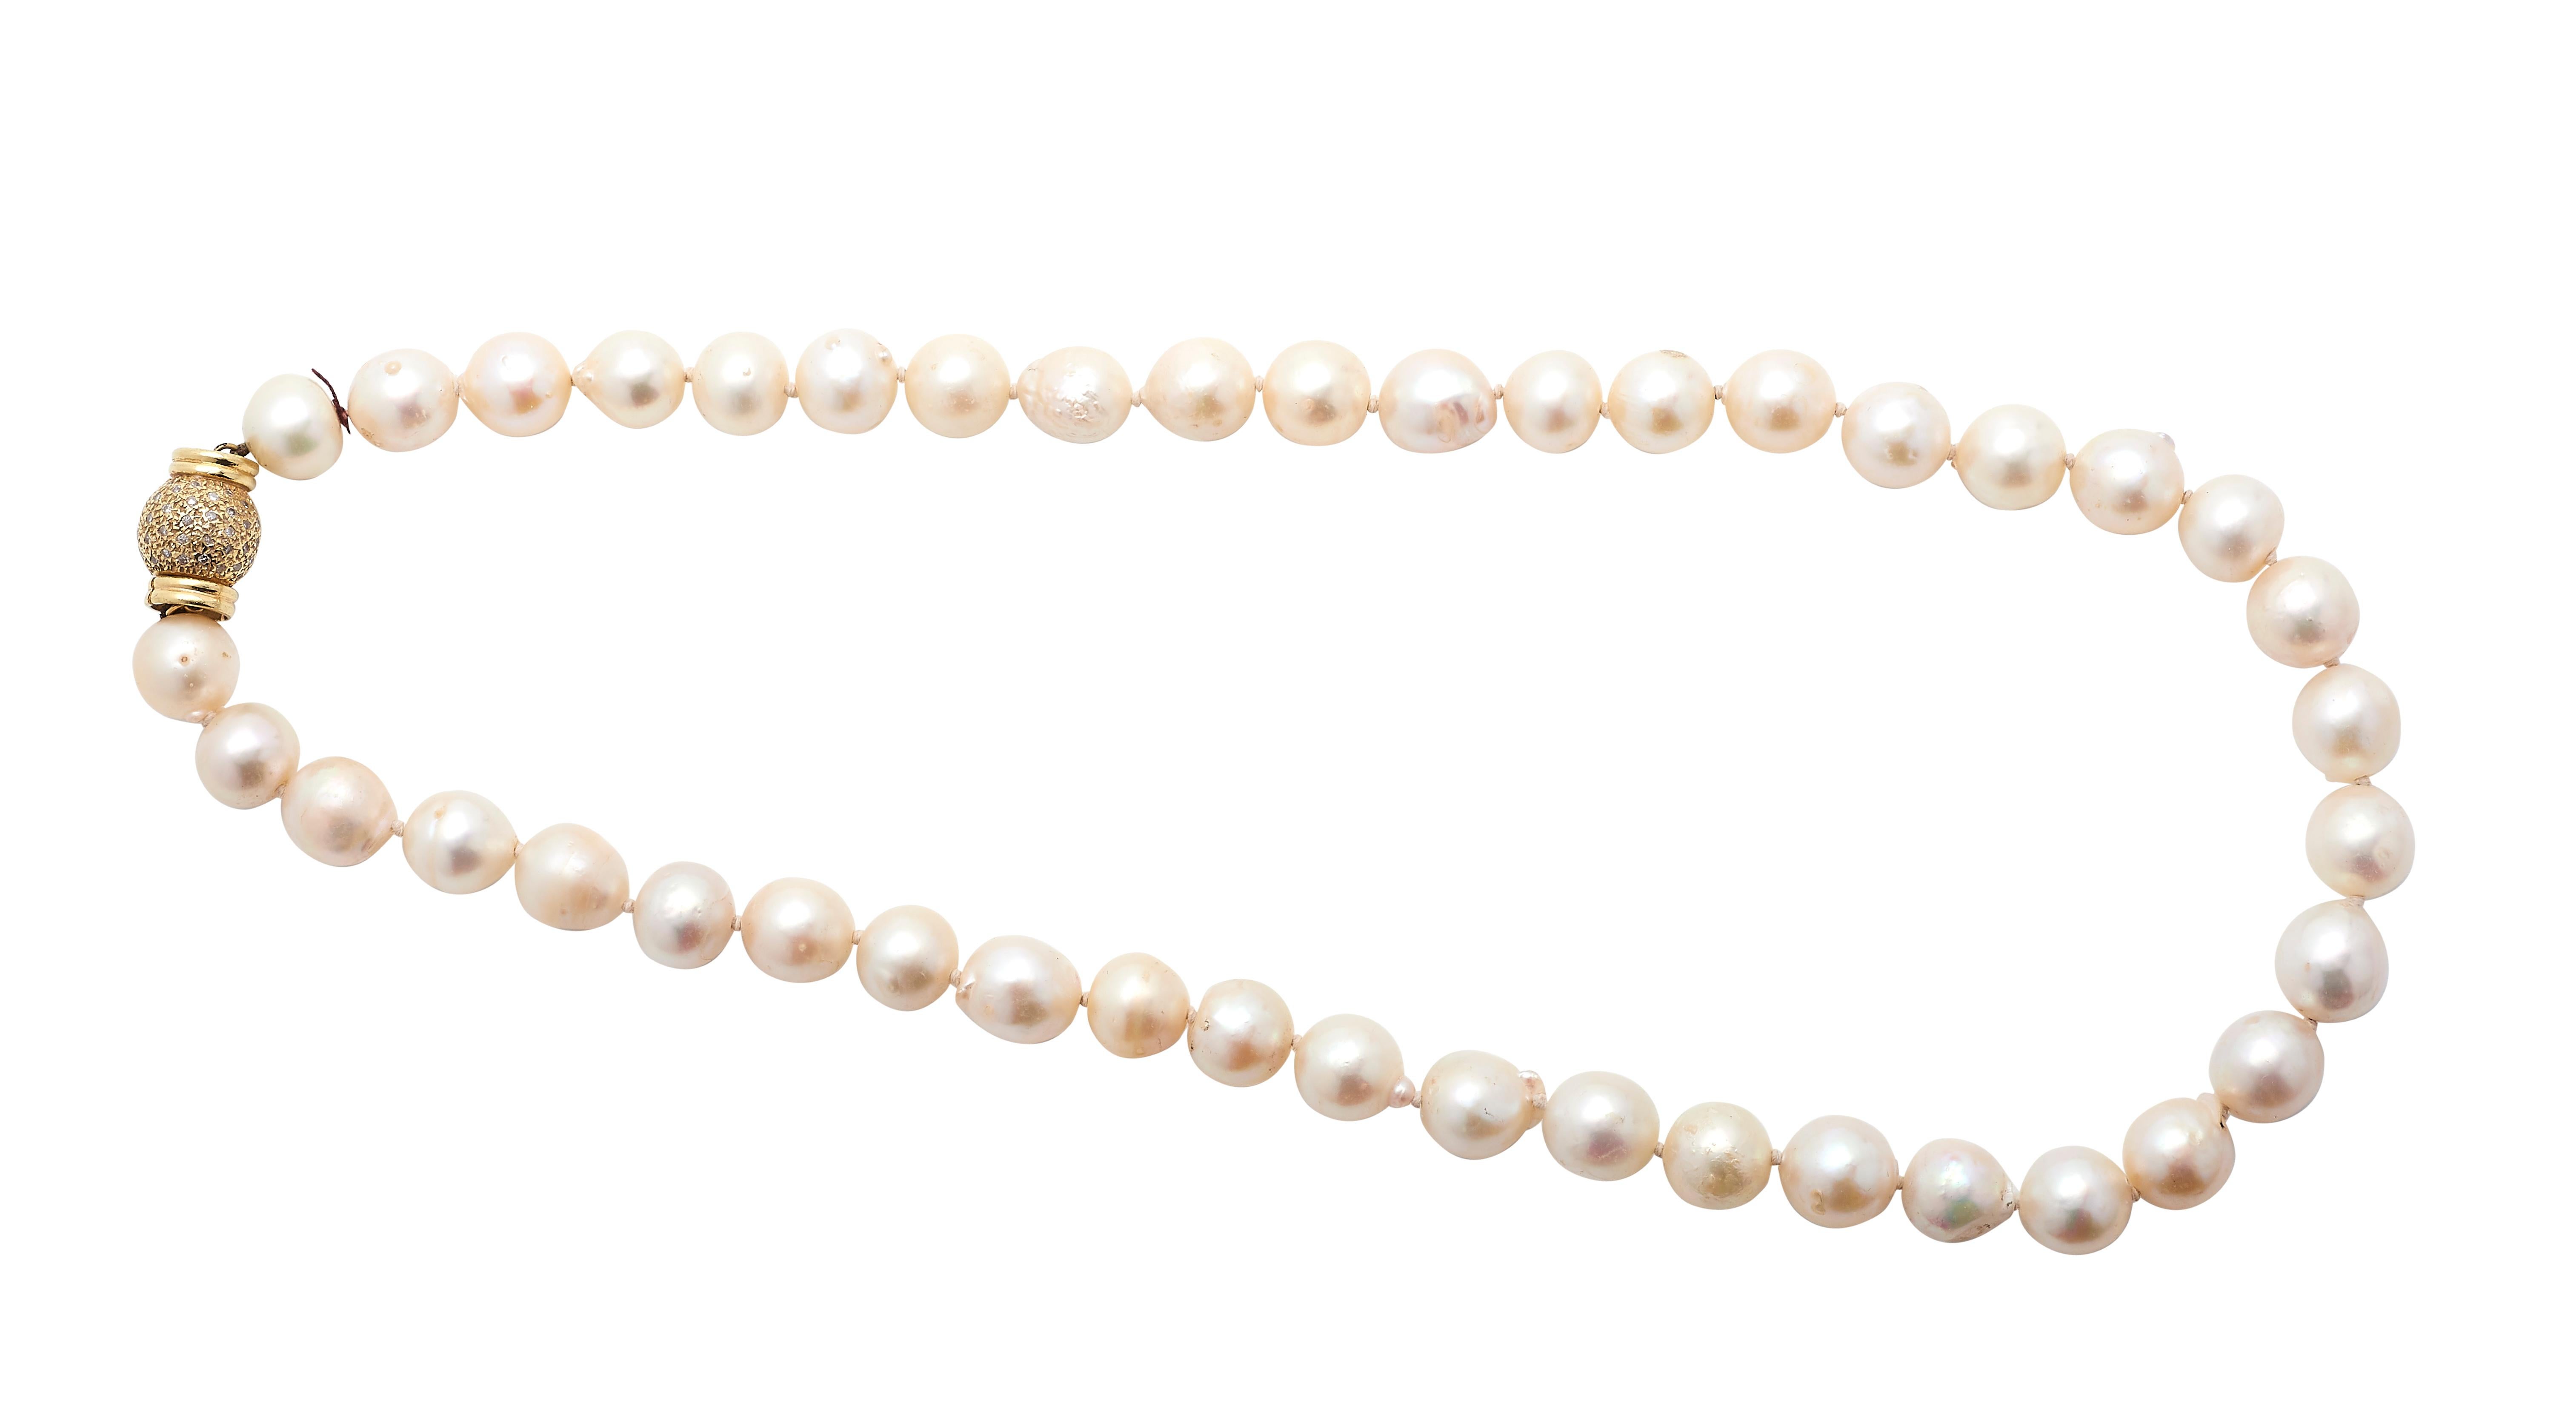 A Cultured Pearl Necklace
the single graduated strand composed of forty-two pearls
measuring approximately 10mm to 11mm in diameter,
completed by an 14 karat gold and diamond clasp
Length 19 in. (48.26 cm.)
65.7 grams (gross)